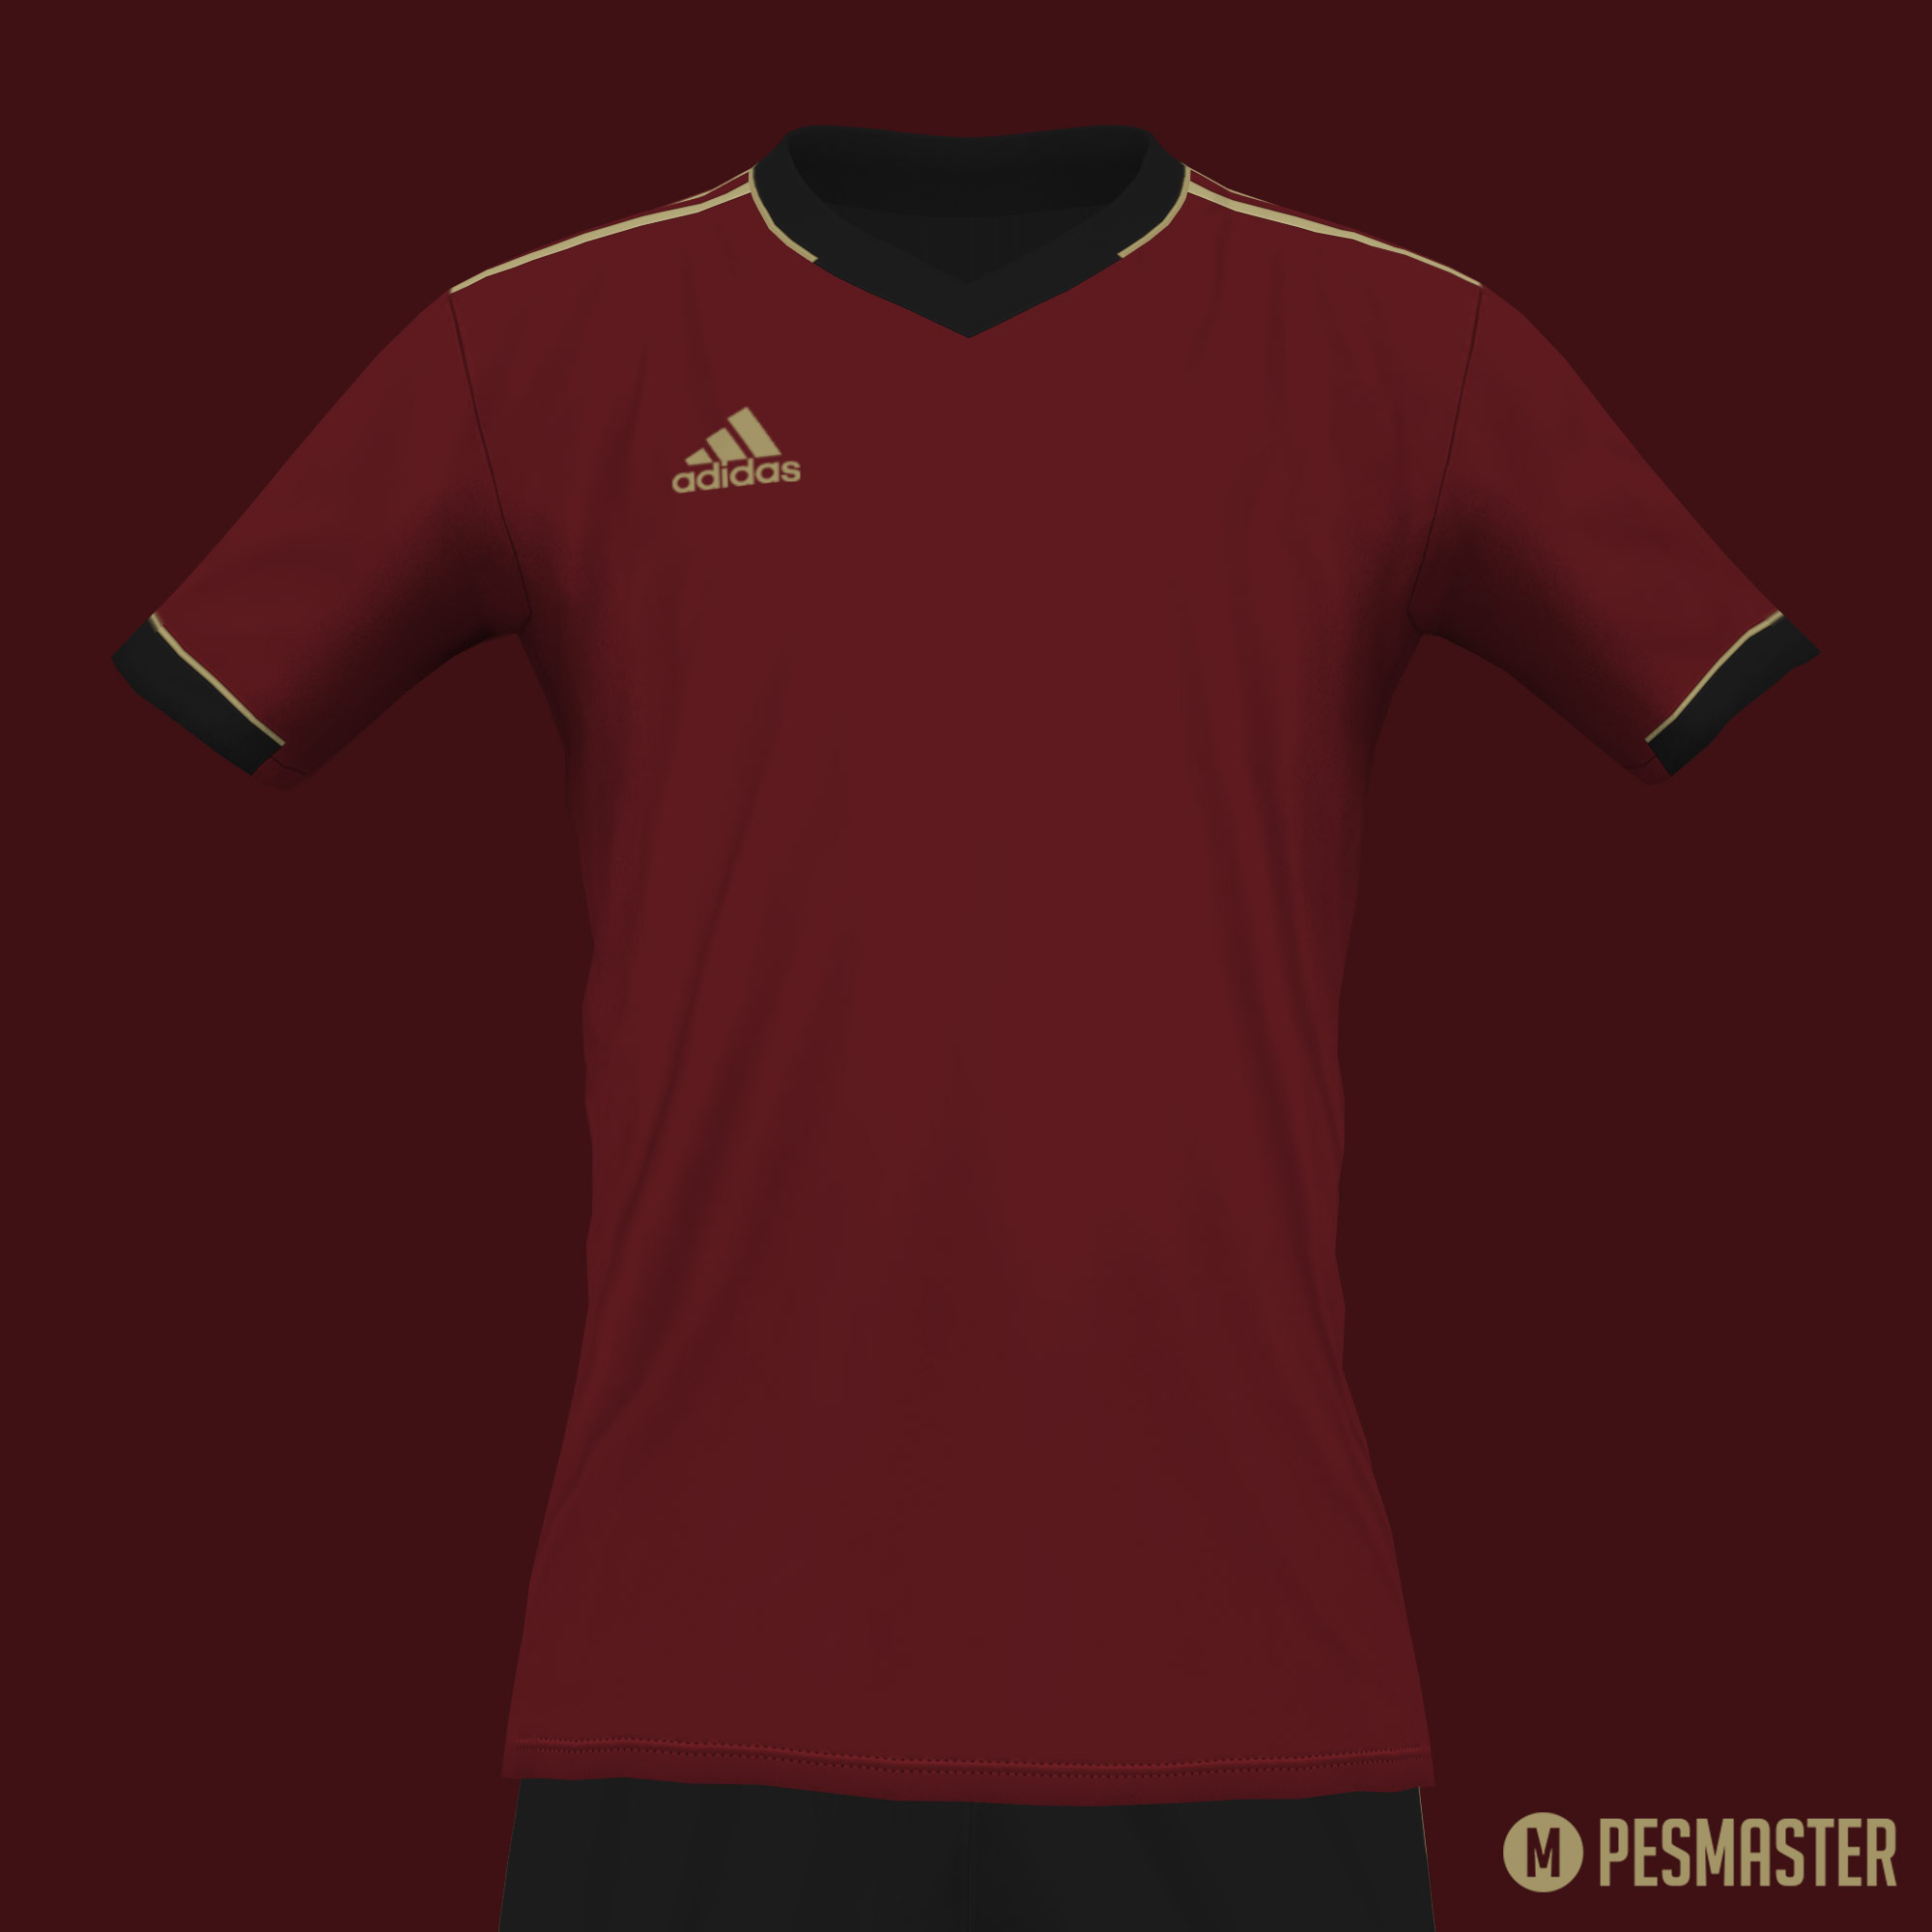 PES Master on Twitter: Preview: Adidas miadidas V template https://t.co/qjdnpiE17M" / Twitter